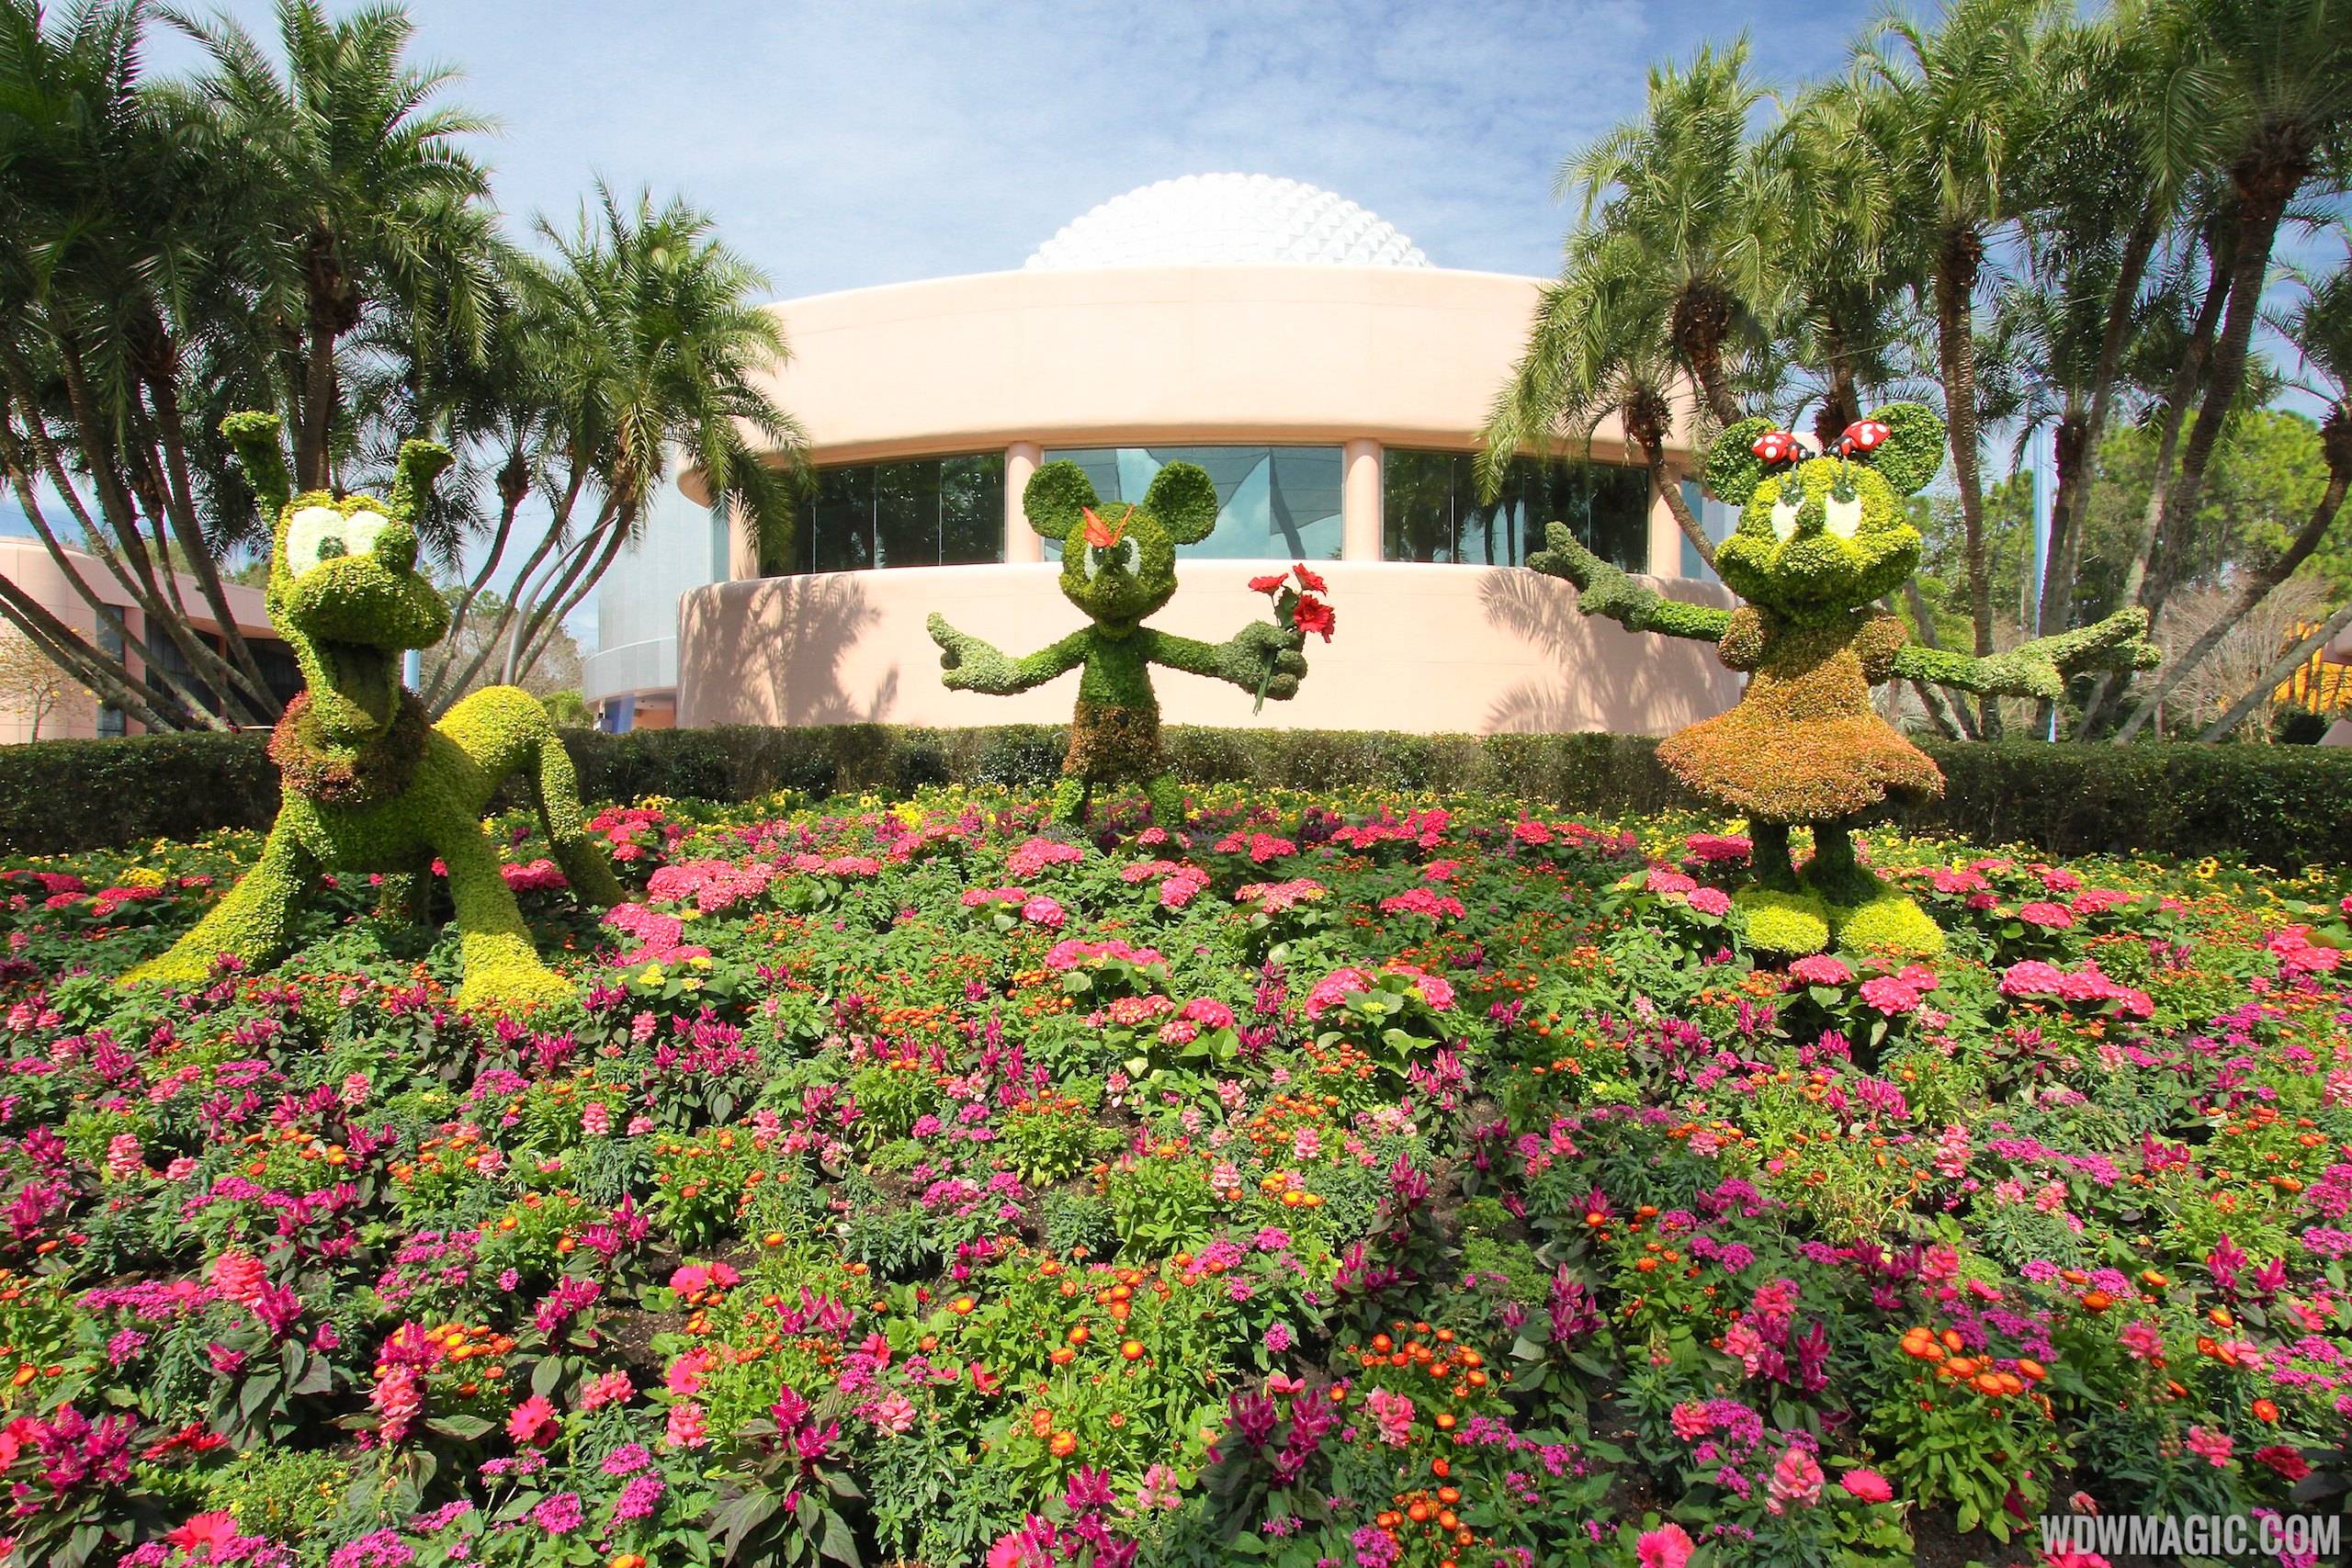 2014 Epcot Flower and Garden Festival - Mickey, Minnie and Pluto topiary